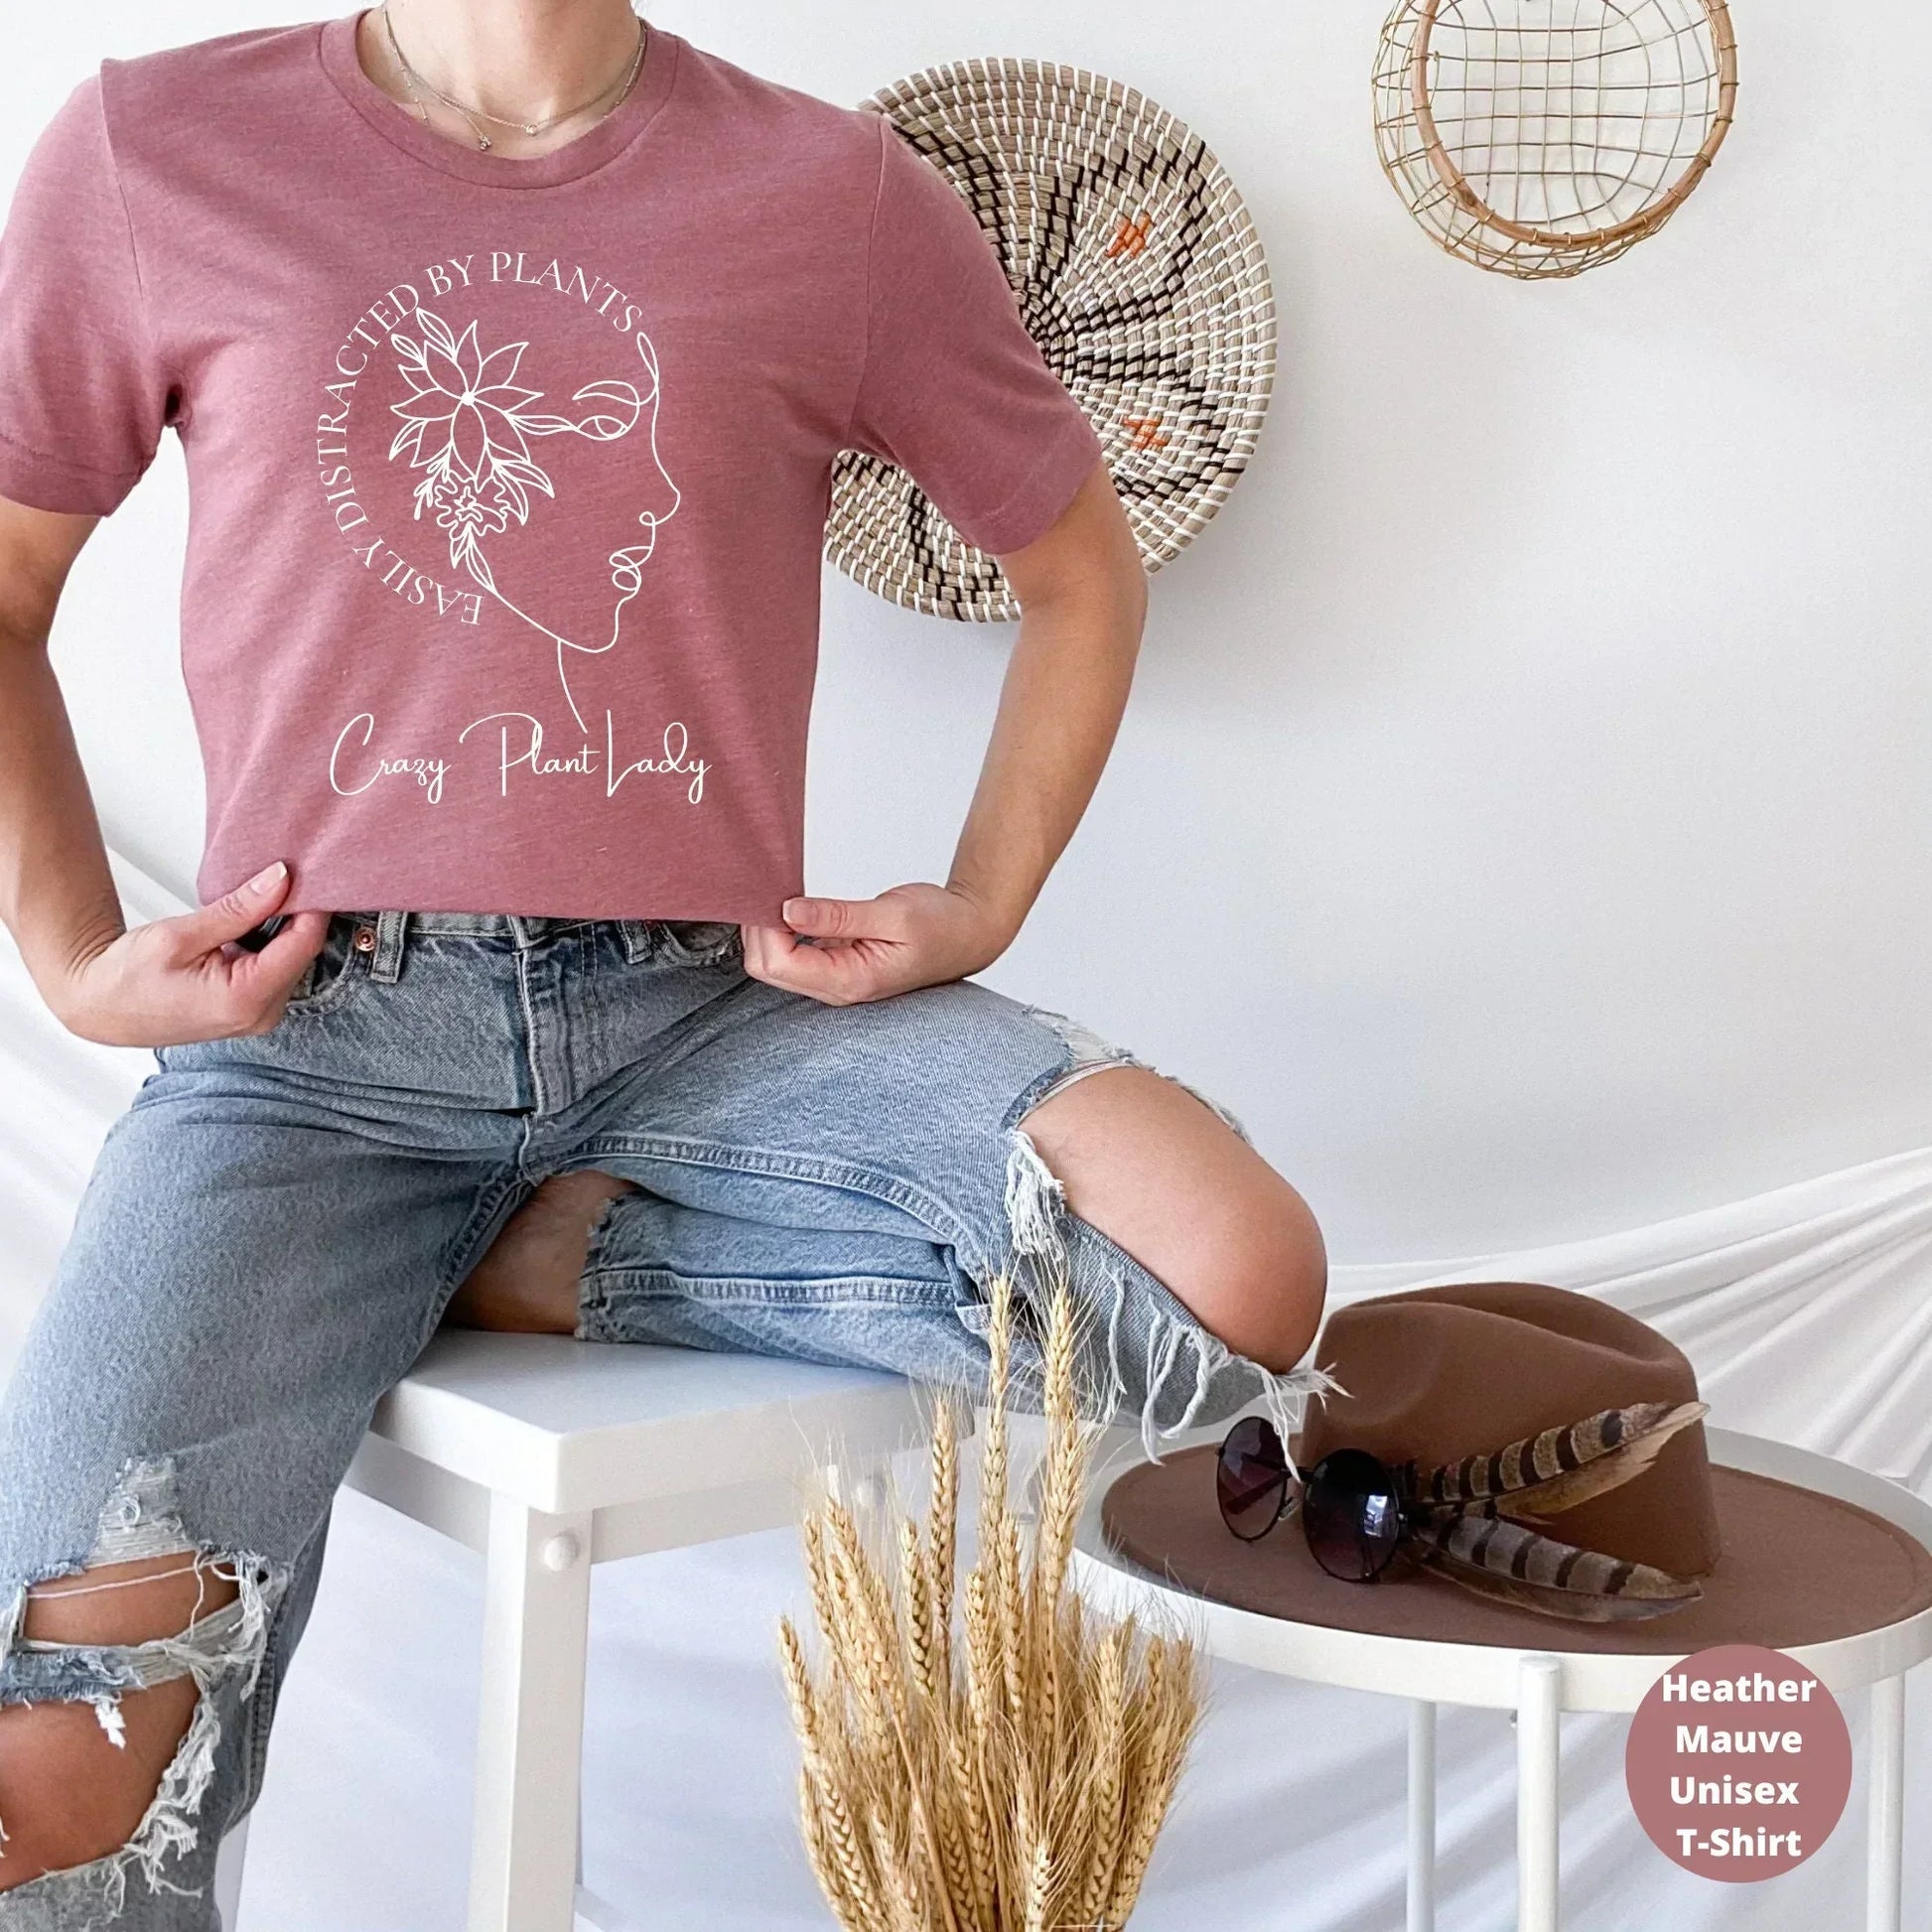 Crazy Plant Lady - Easily Distracted by plants - Plant Mom - Plant Lady Shirt - Plant Mom Gift - Vegan Shirt - Plant Lover Tee - Plant Based